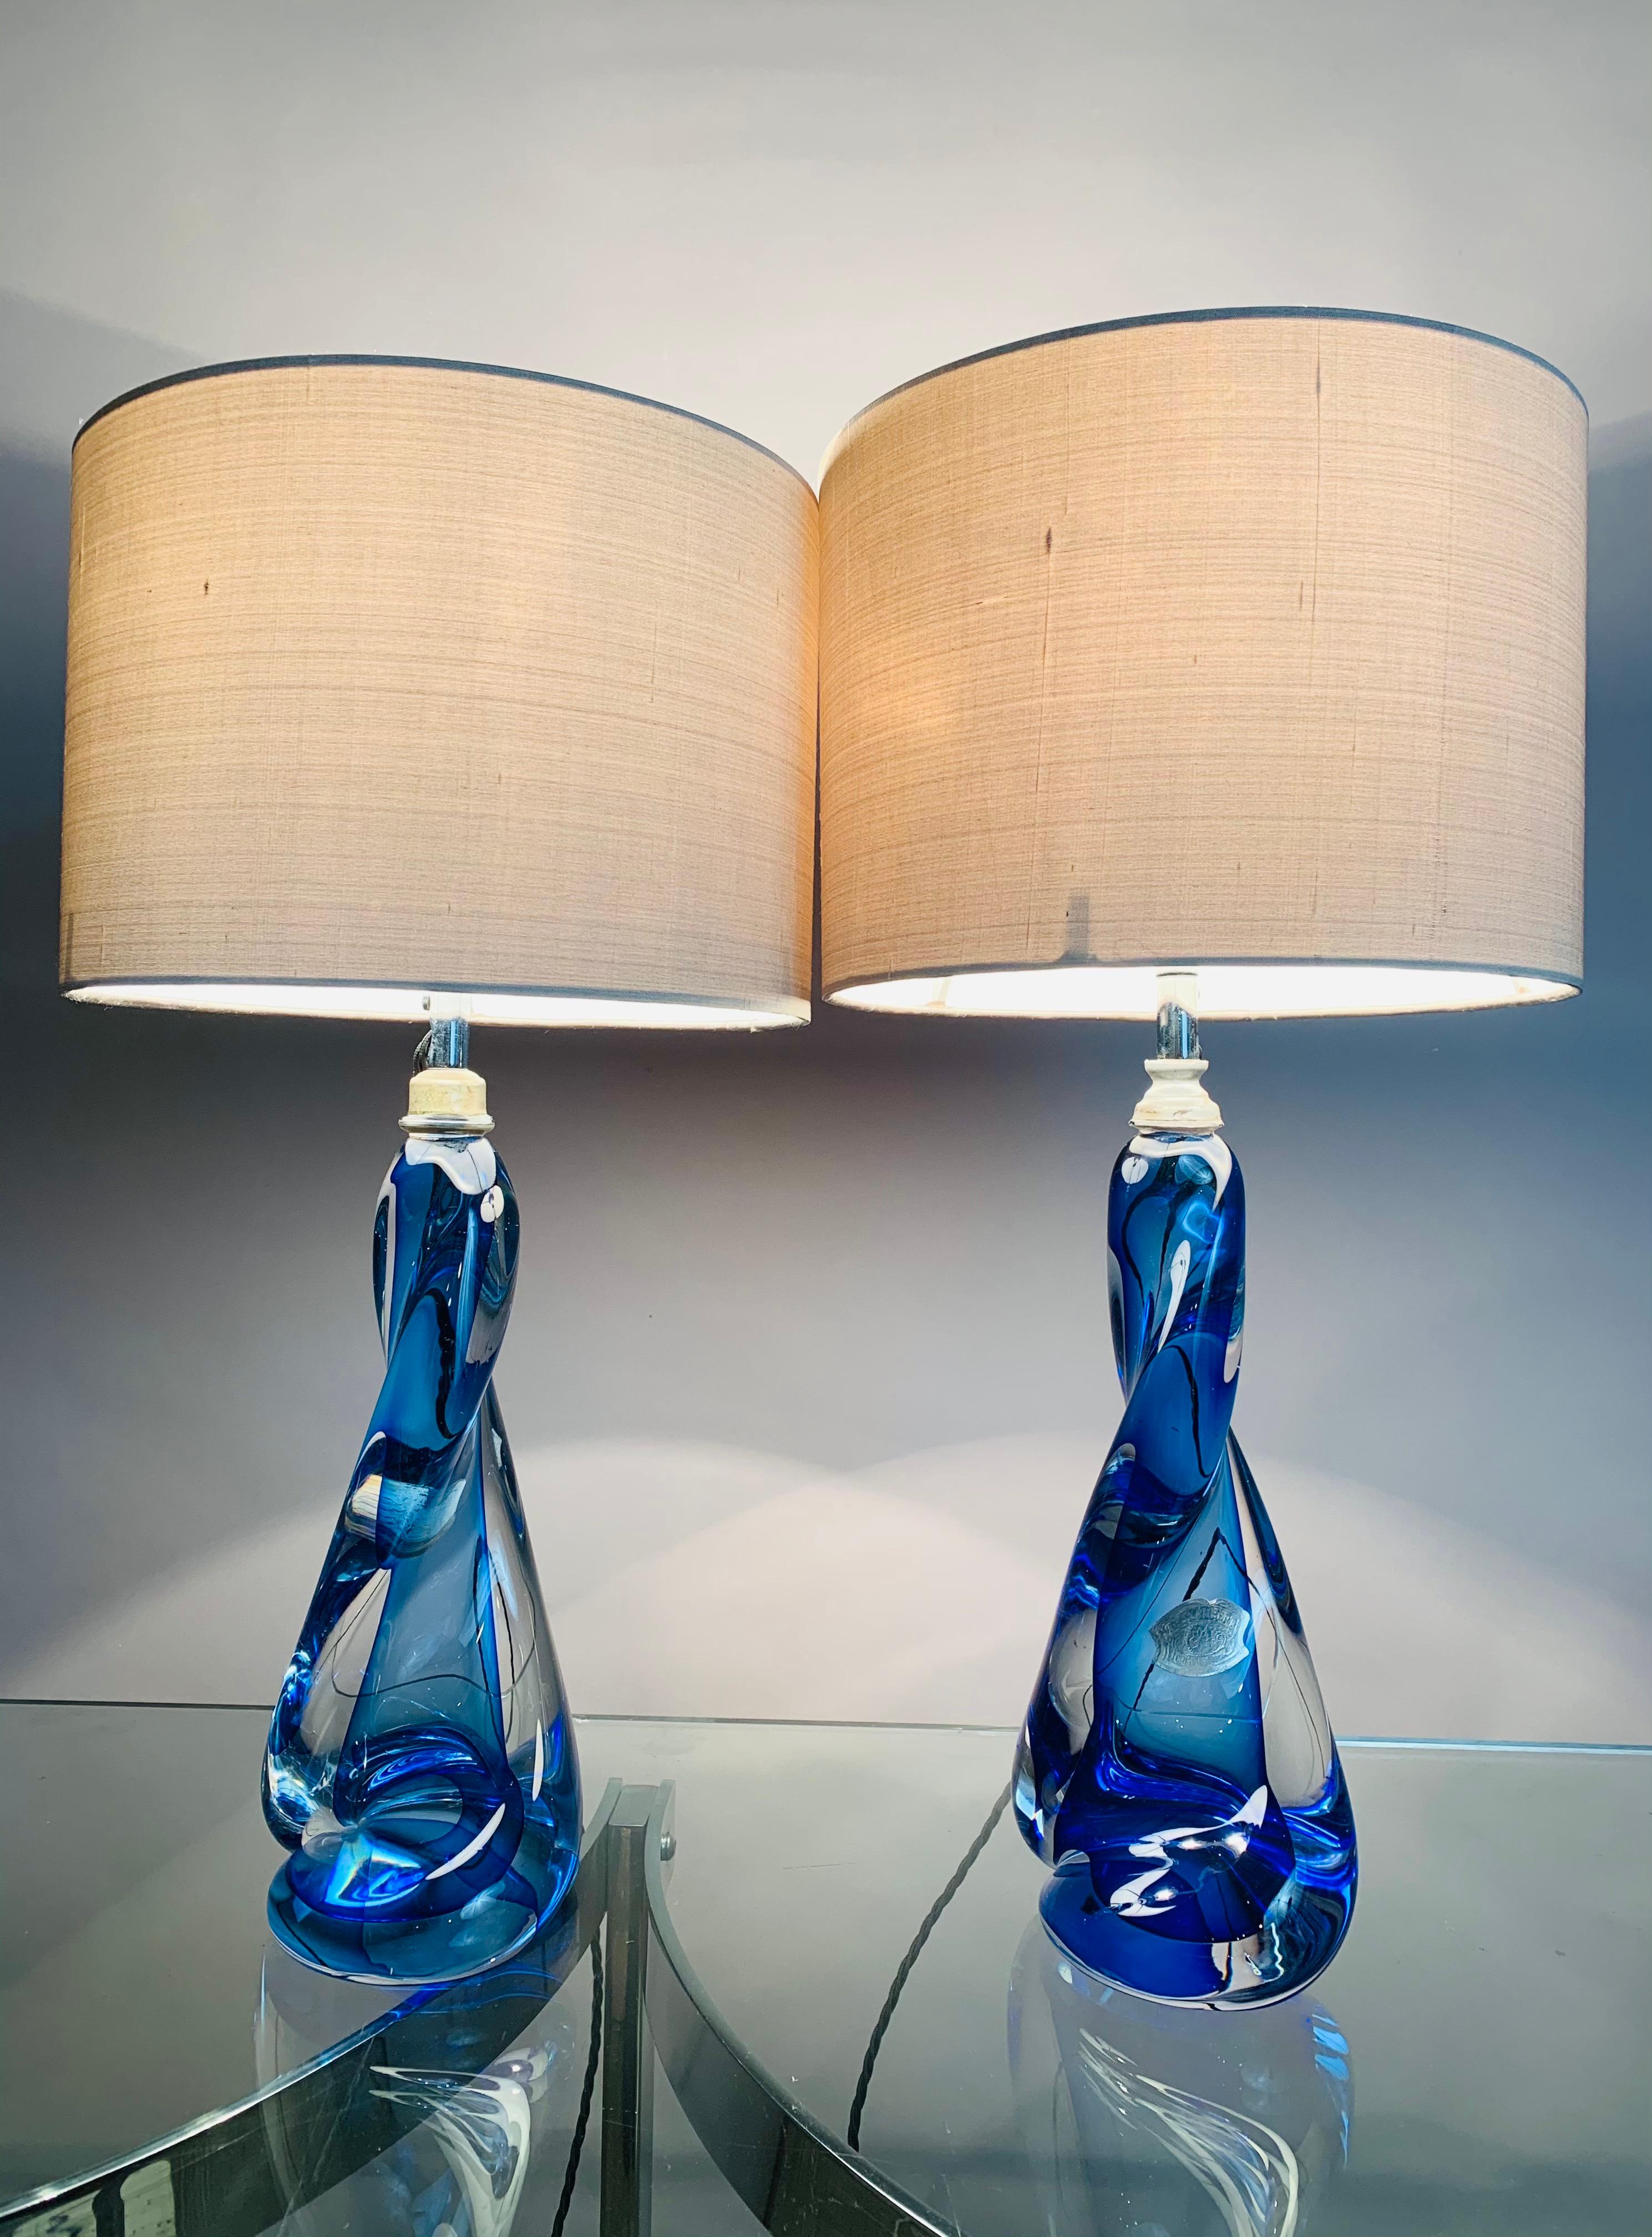 Pair of 1950s, Val St Lambert, blue and clear glass, twisted crystal lamp bases with chrome mounted light fittings. Handmade in heavy lead crystal glass in Belgium. The brand new grey silk shades are included. The lamps still bear their original Val